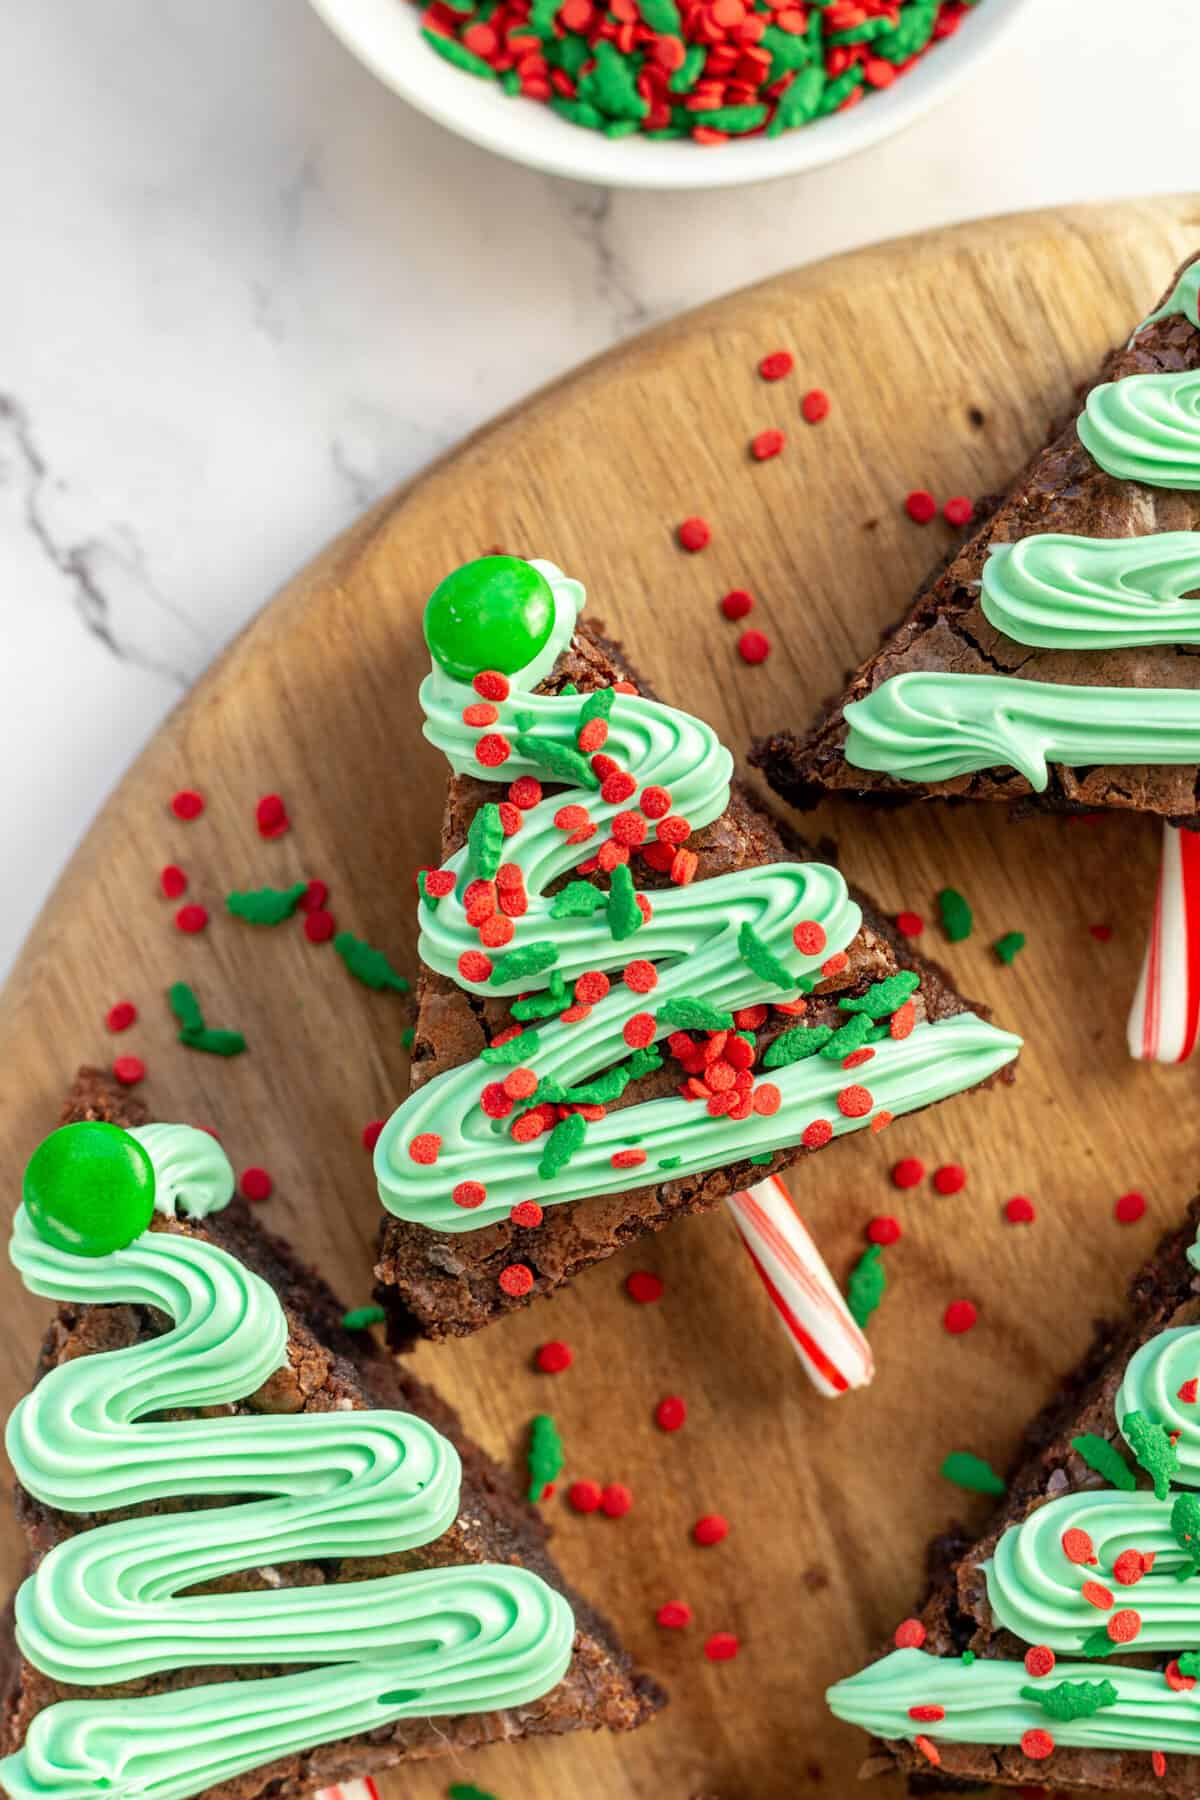 A close up image of a Christmas tree brownie with a frosting garland and red and green sprinkles with a green M&M for a star and a candy cane stick for a trunk, served on a round wooden board.